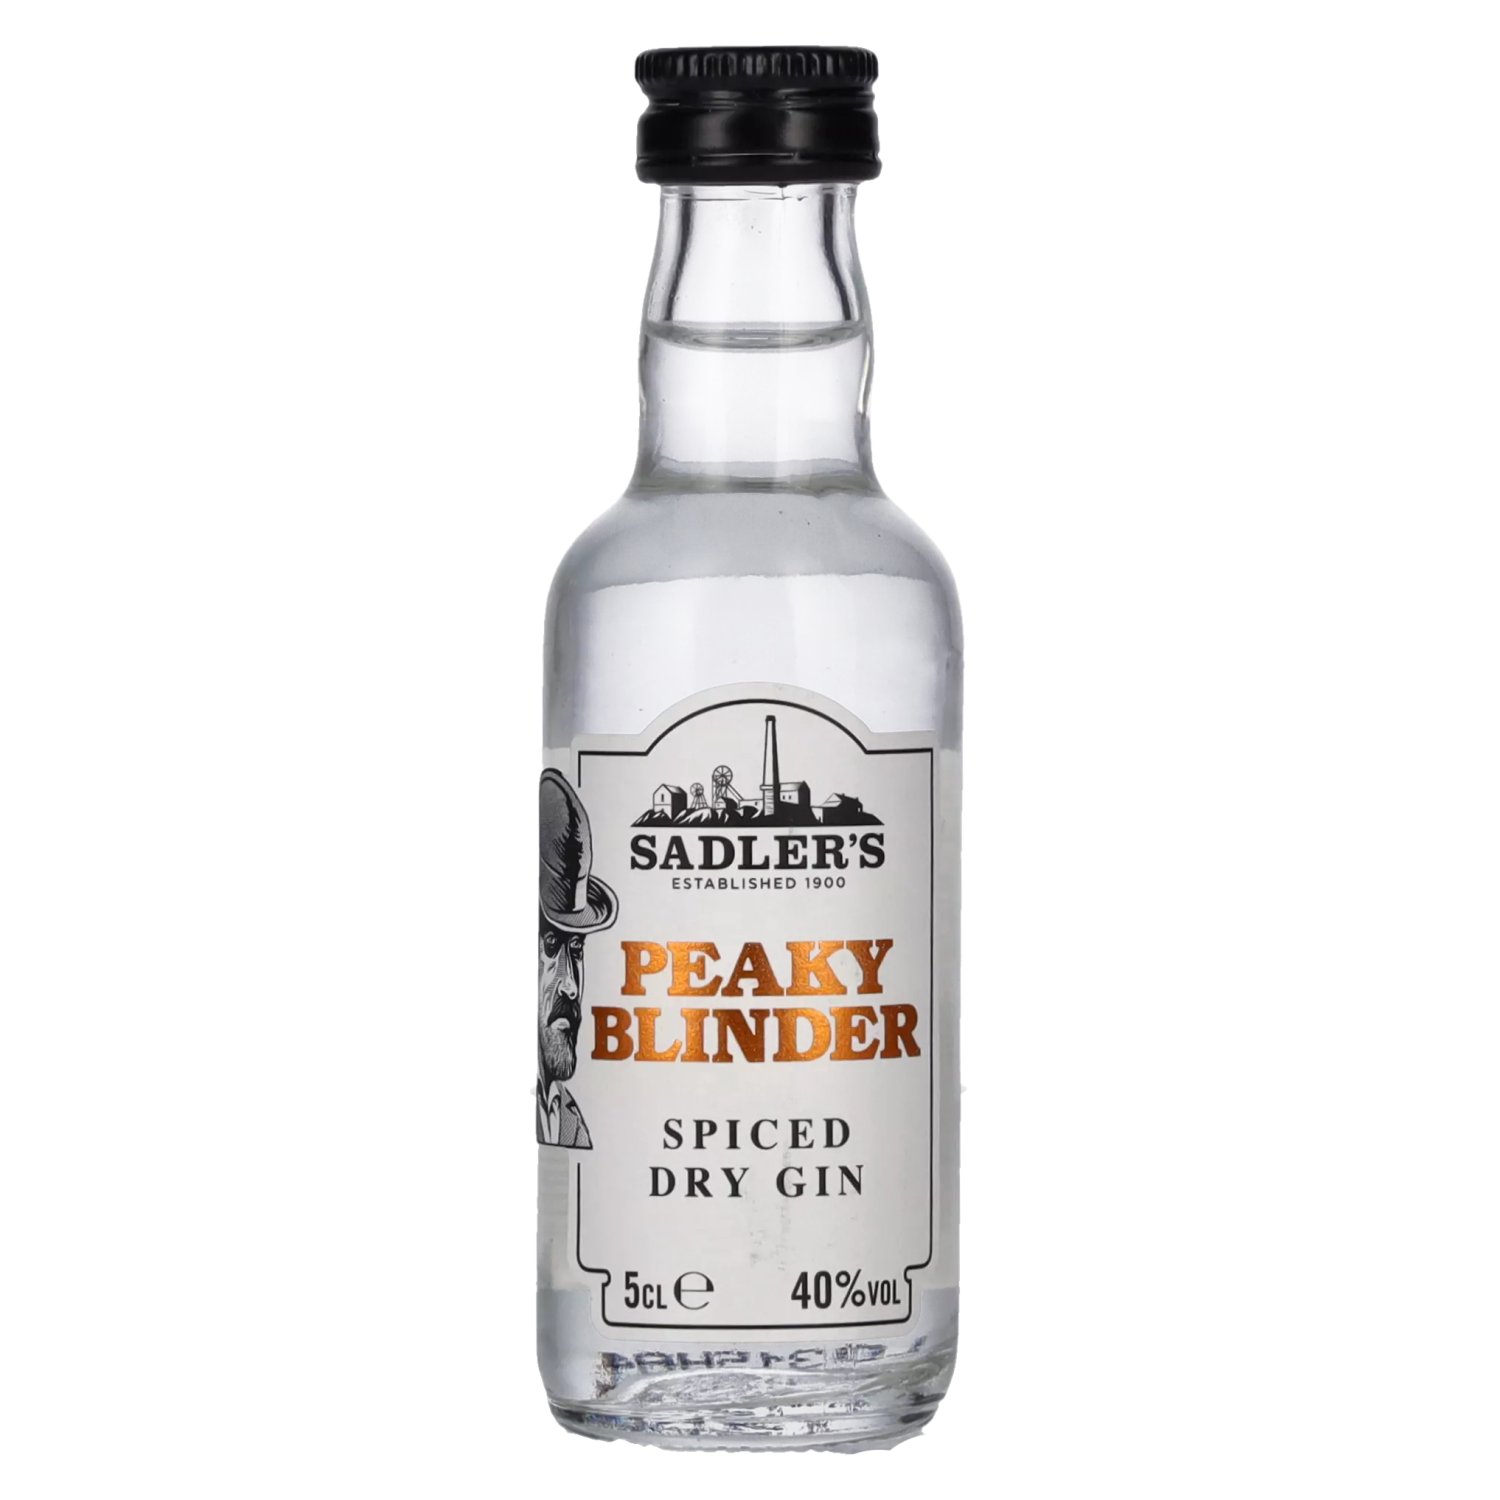 Peaky Blinder Spiced Dry Gin 40% Vol. 12x0,05l